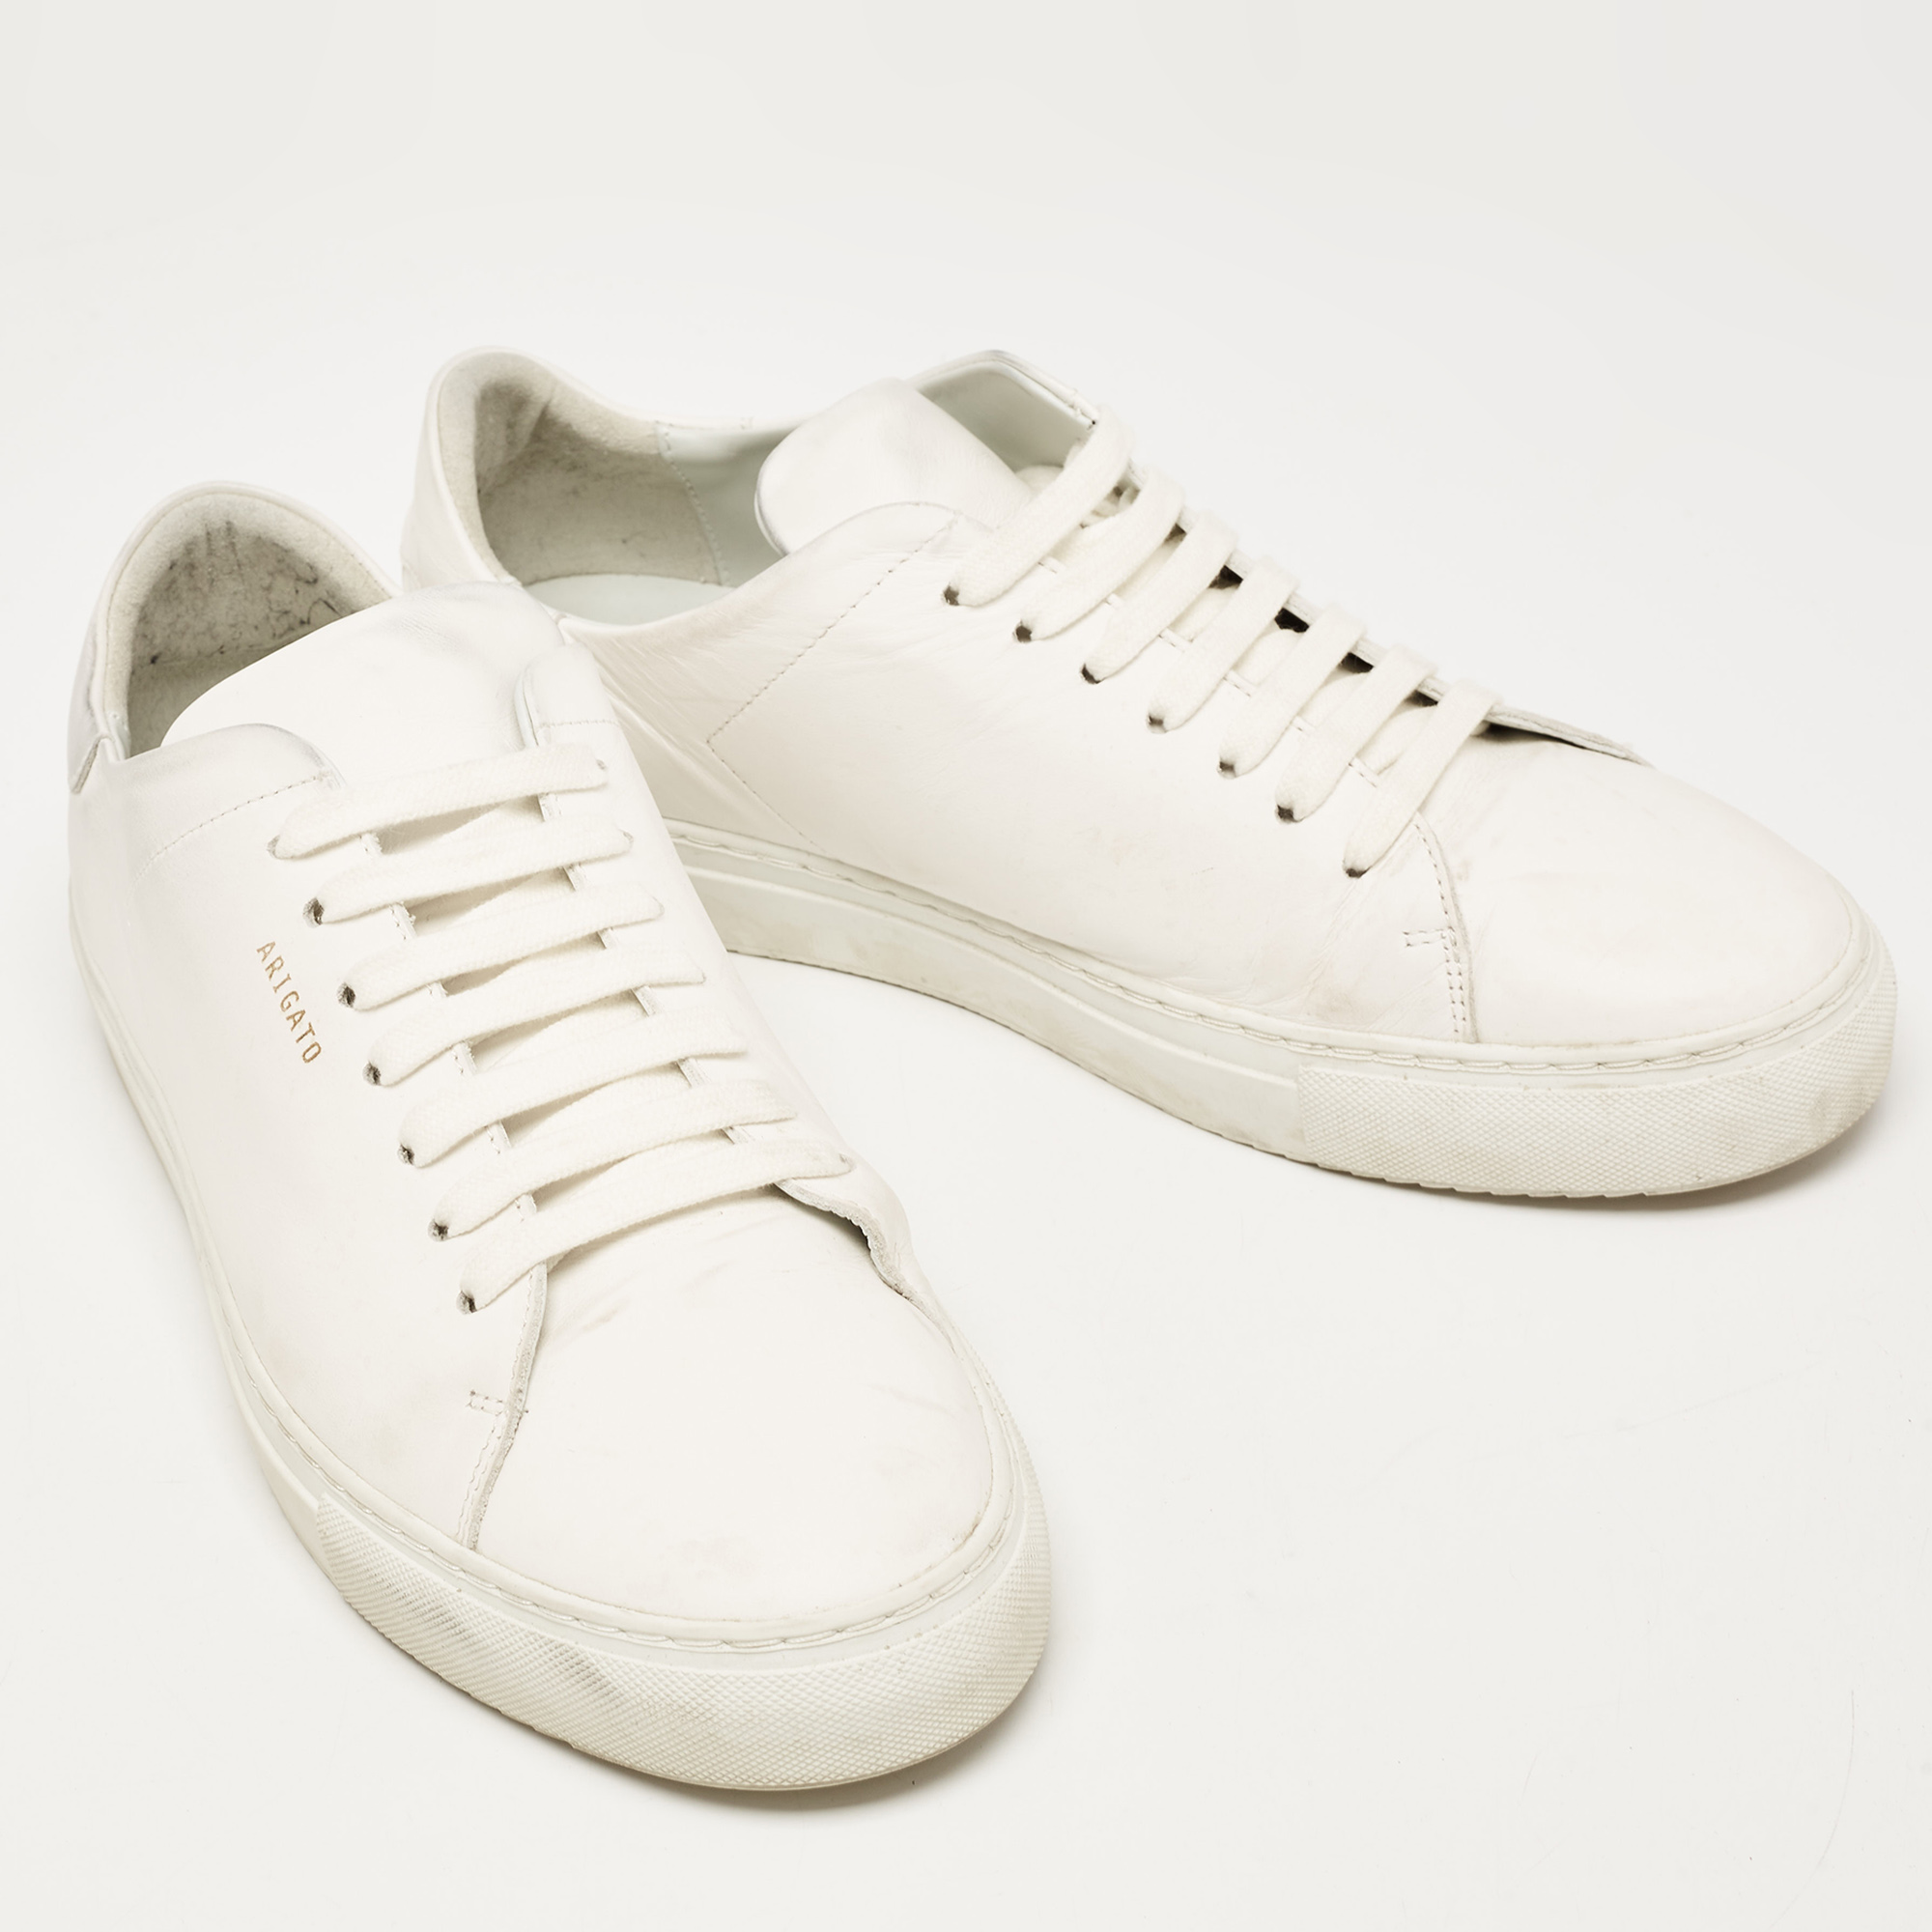 Axel Arigato White Leather Low Top Sneakers Size 43